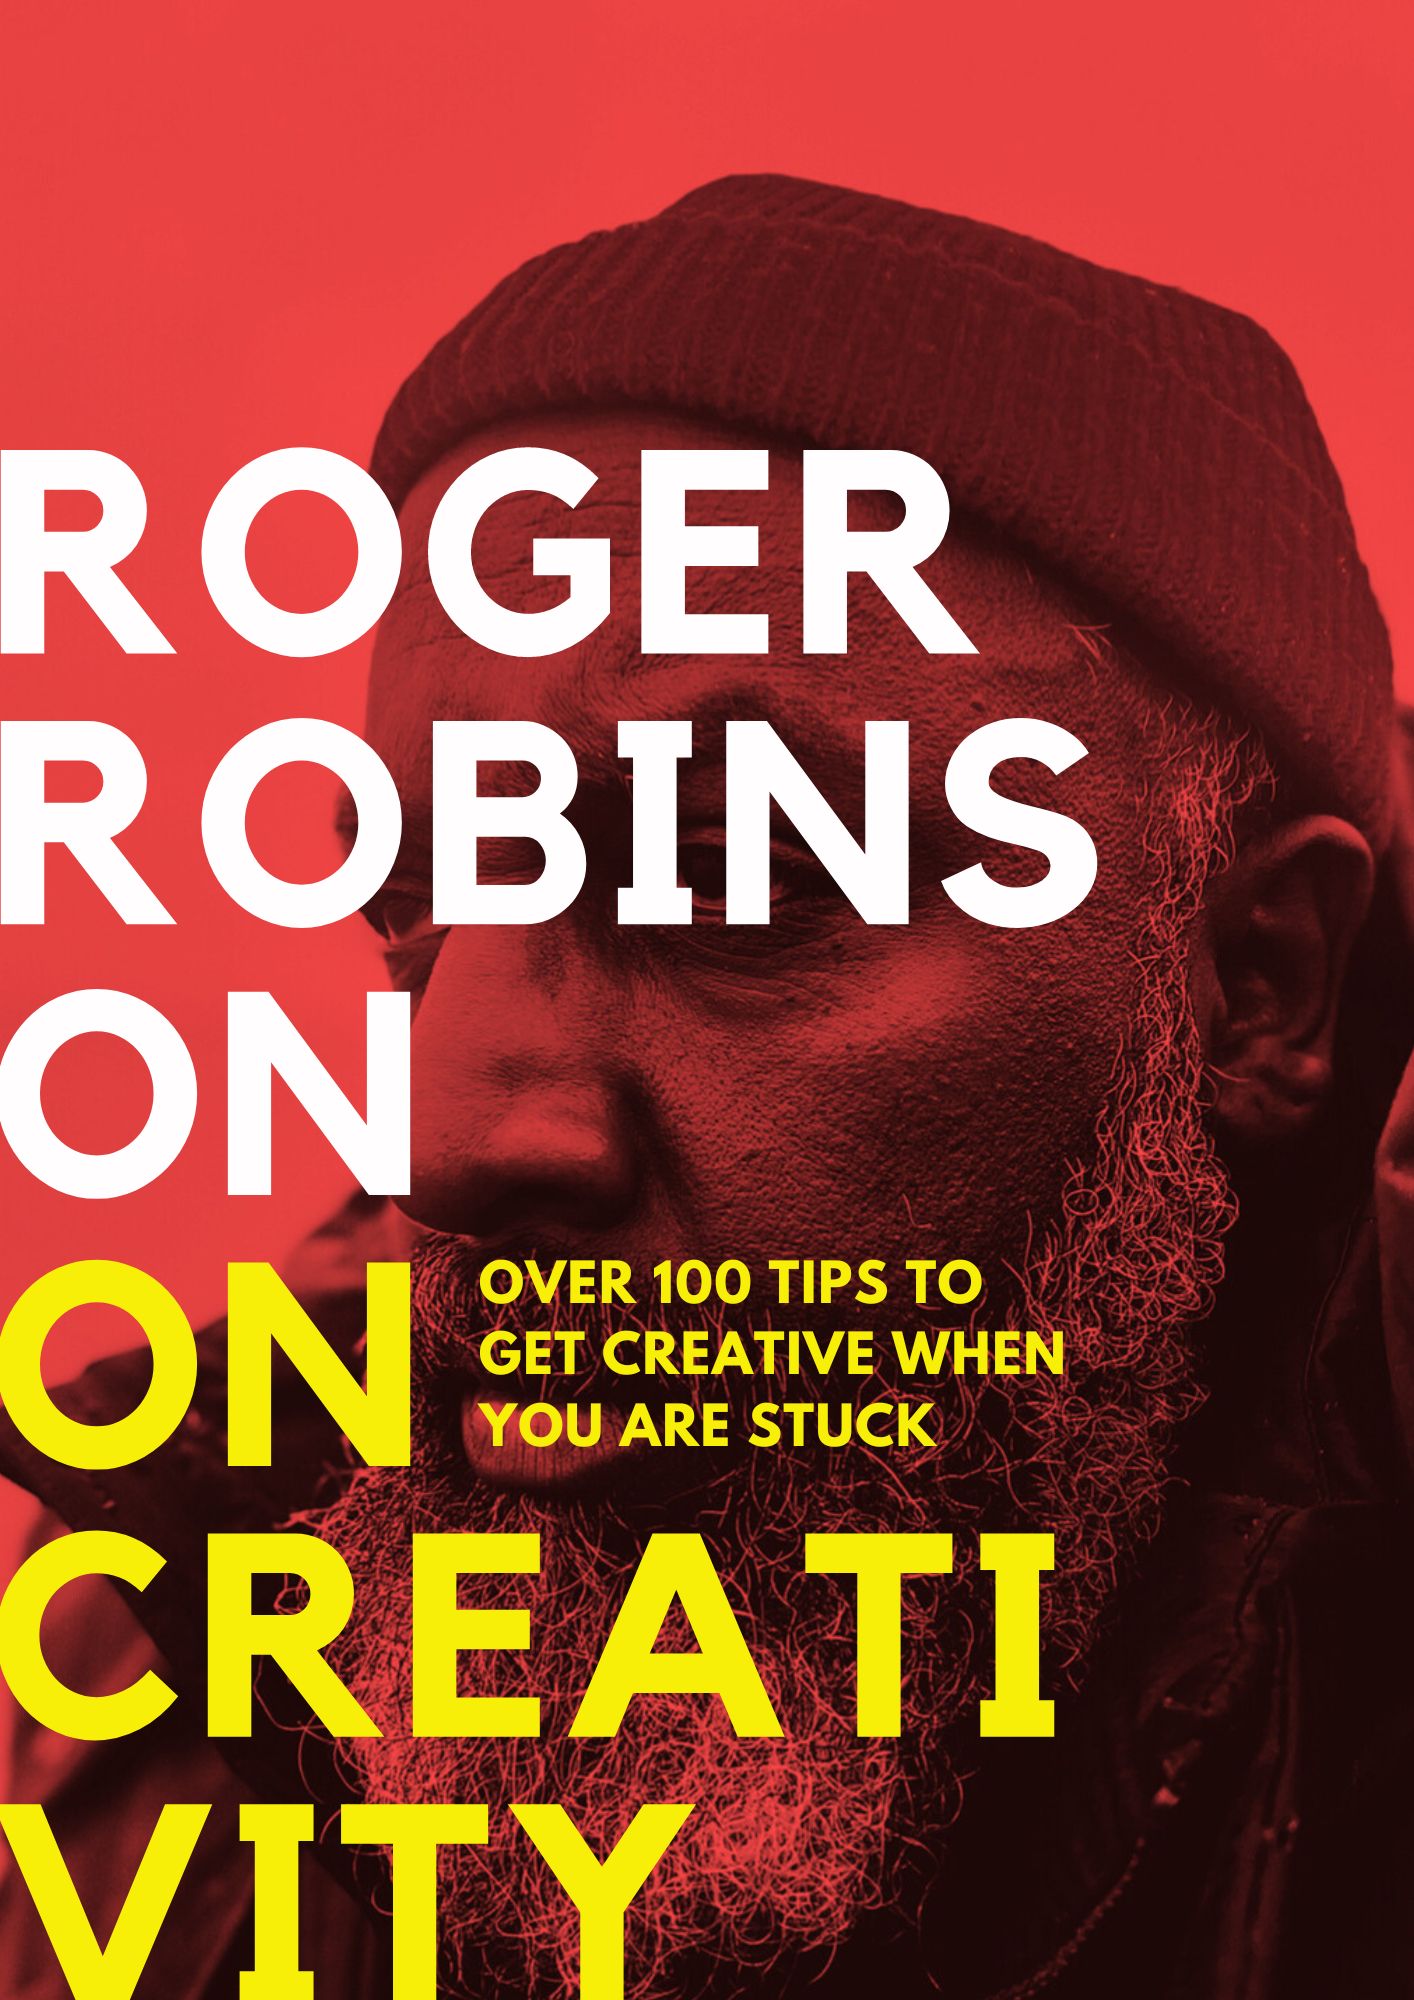 Roger Robinson - On Creativity book cover with editing from Co-relate